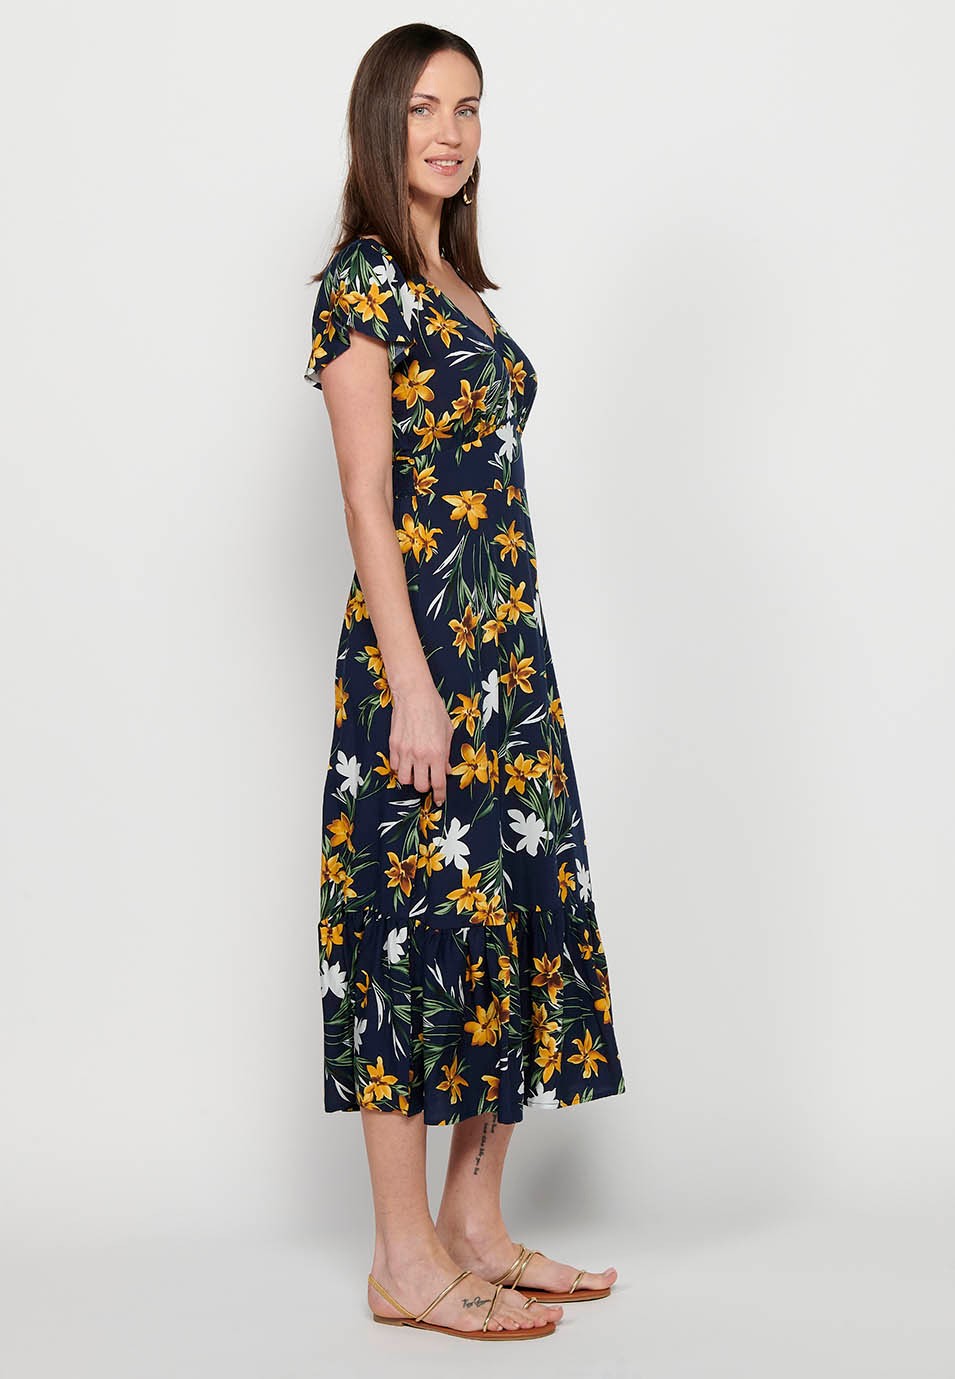 Long short-sleeved dress with V-neck and floral print in Navy for Women 5